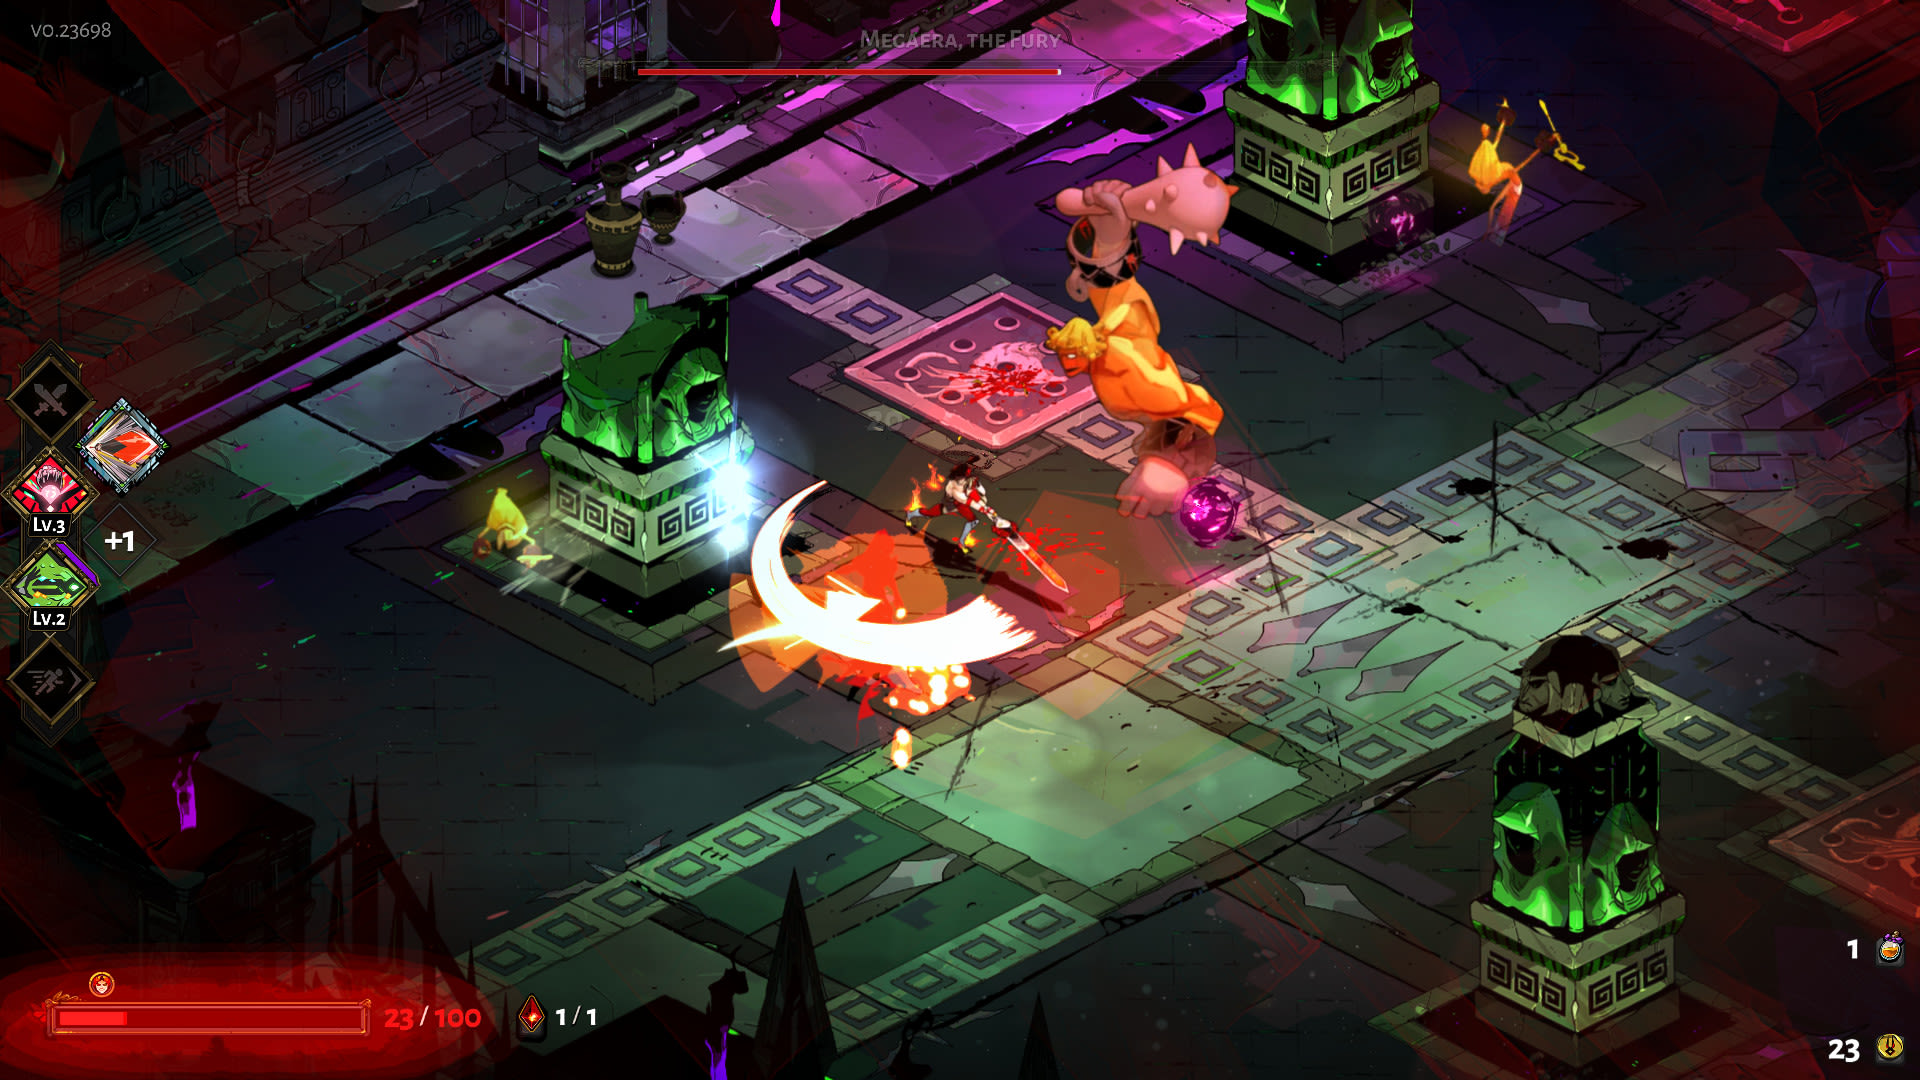 A screenshot from Hades, showing player character Zagreus attacking a group of enemies